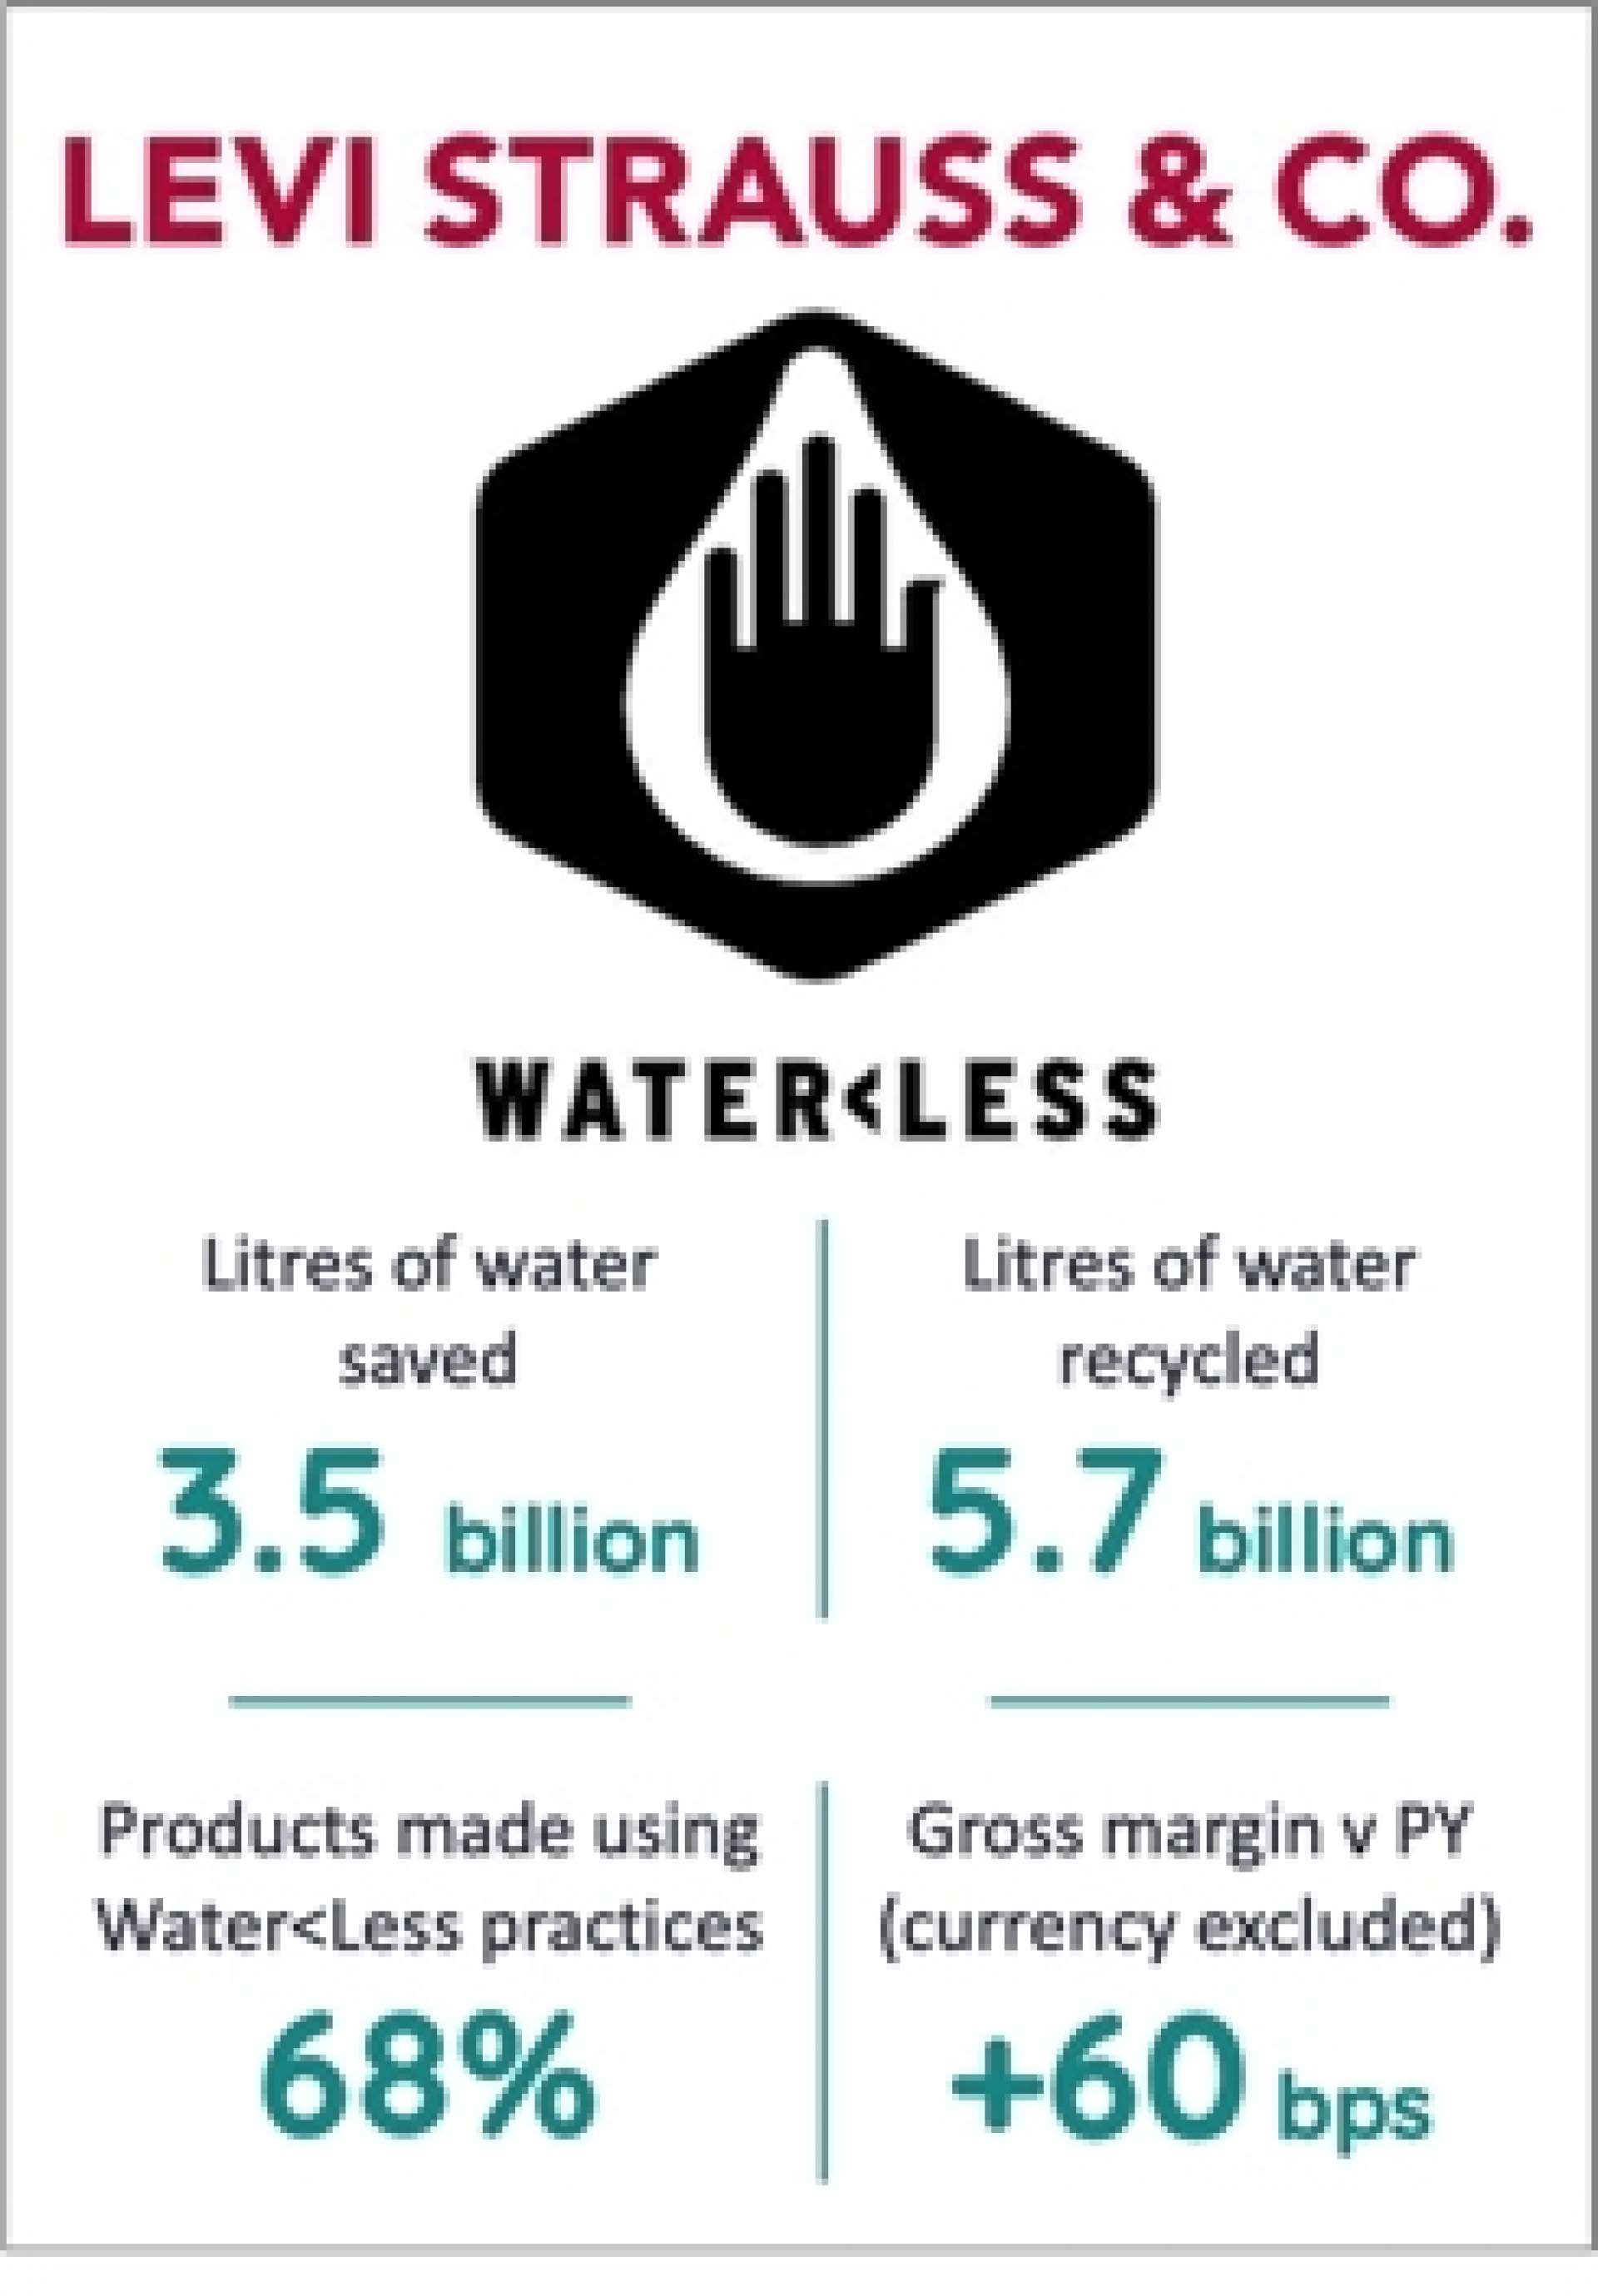 Levi's Water<Less program reduces water use